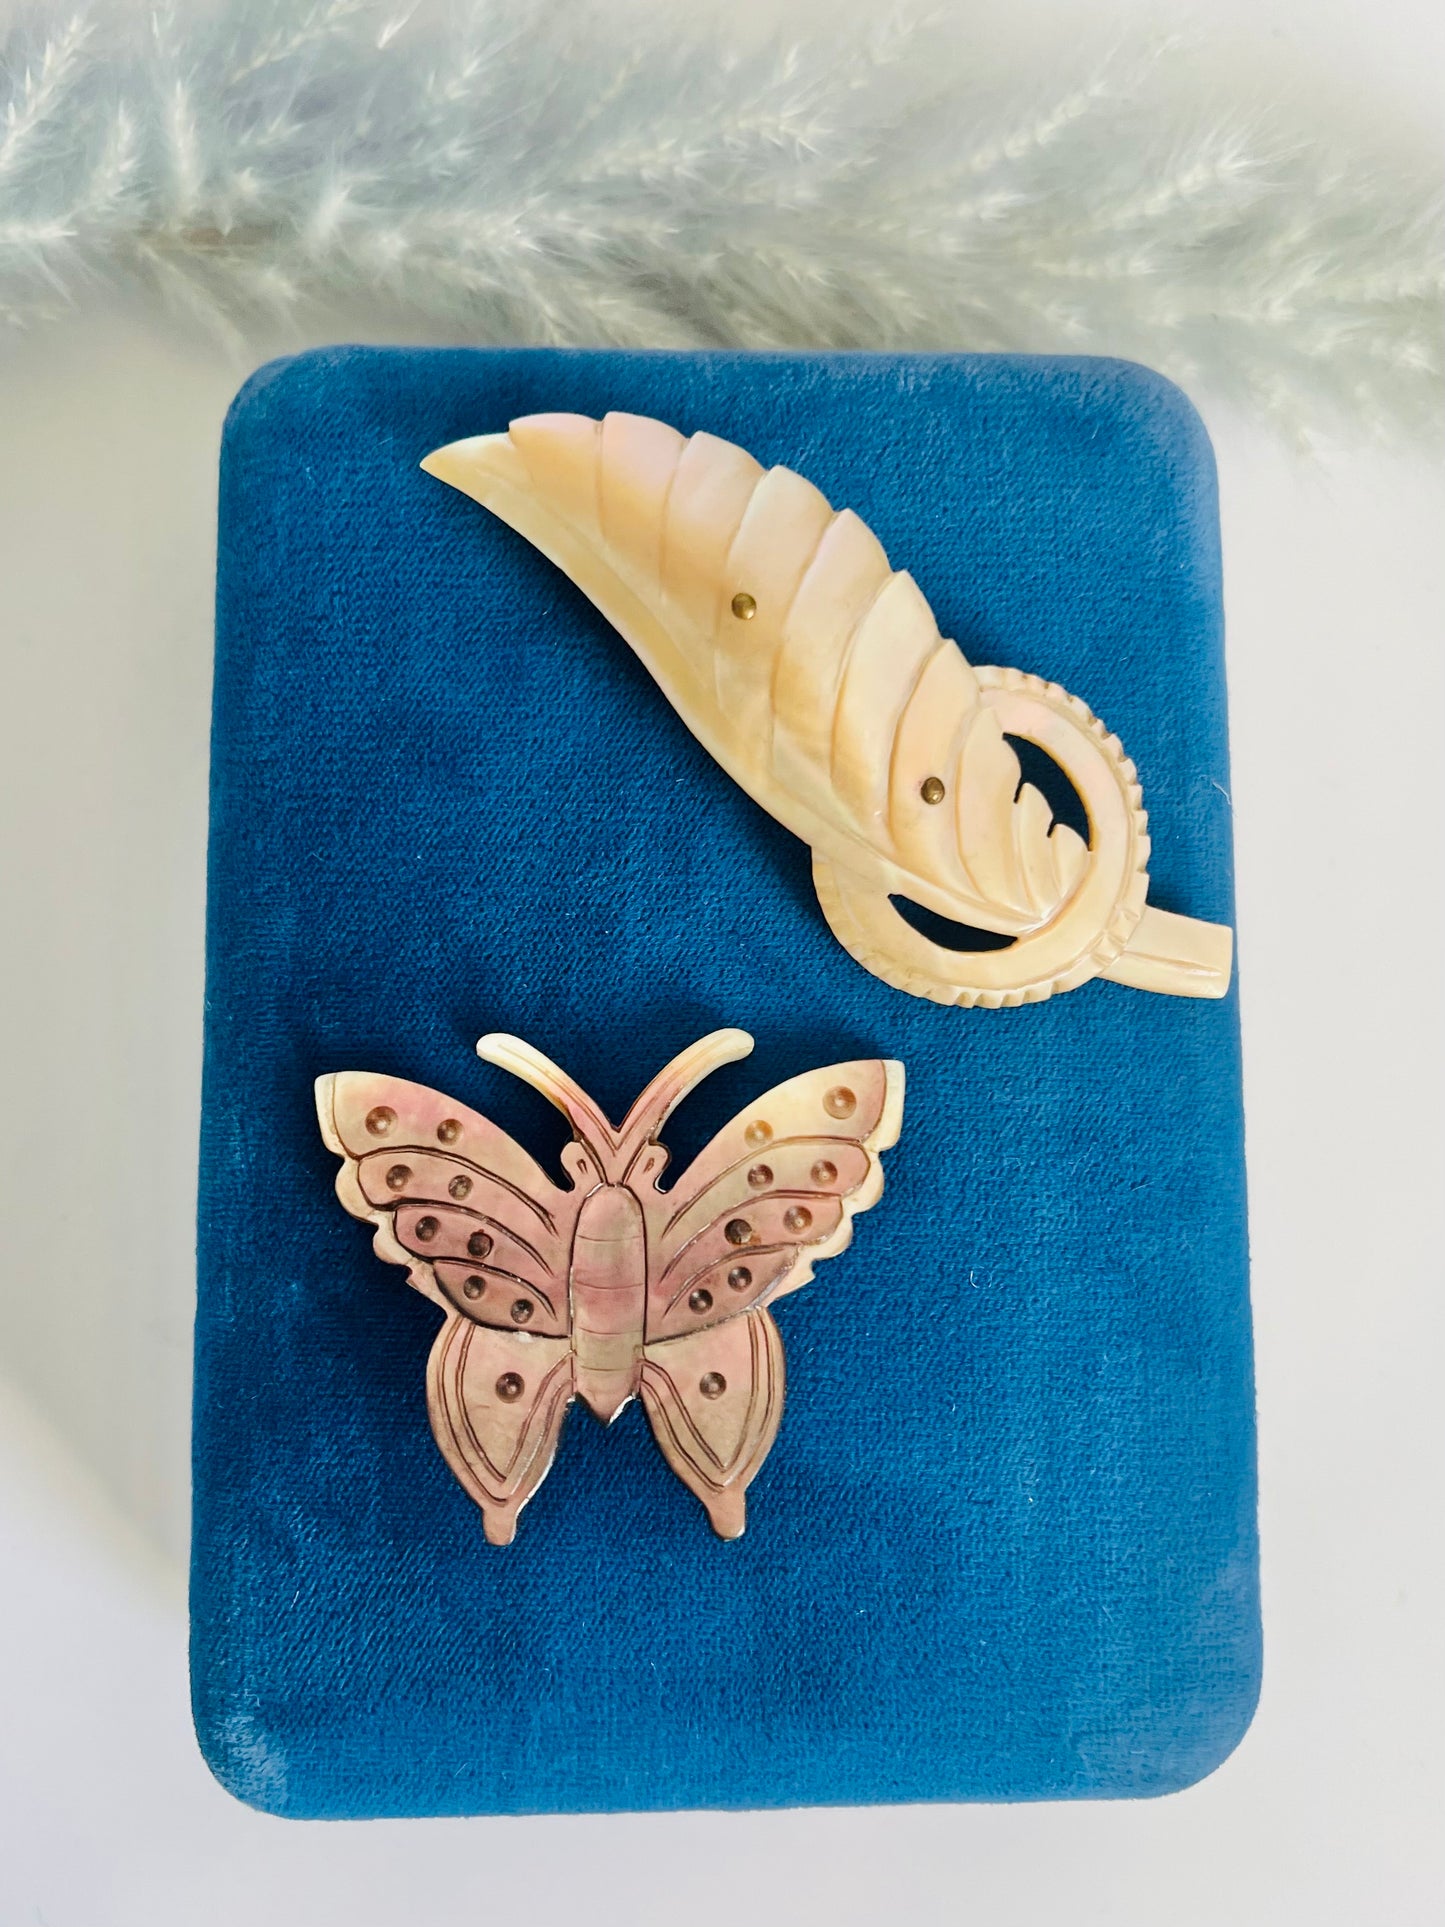 Vintage 1940s Carved Mother of Pearl Butterfly Brooch Pin